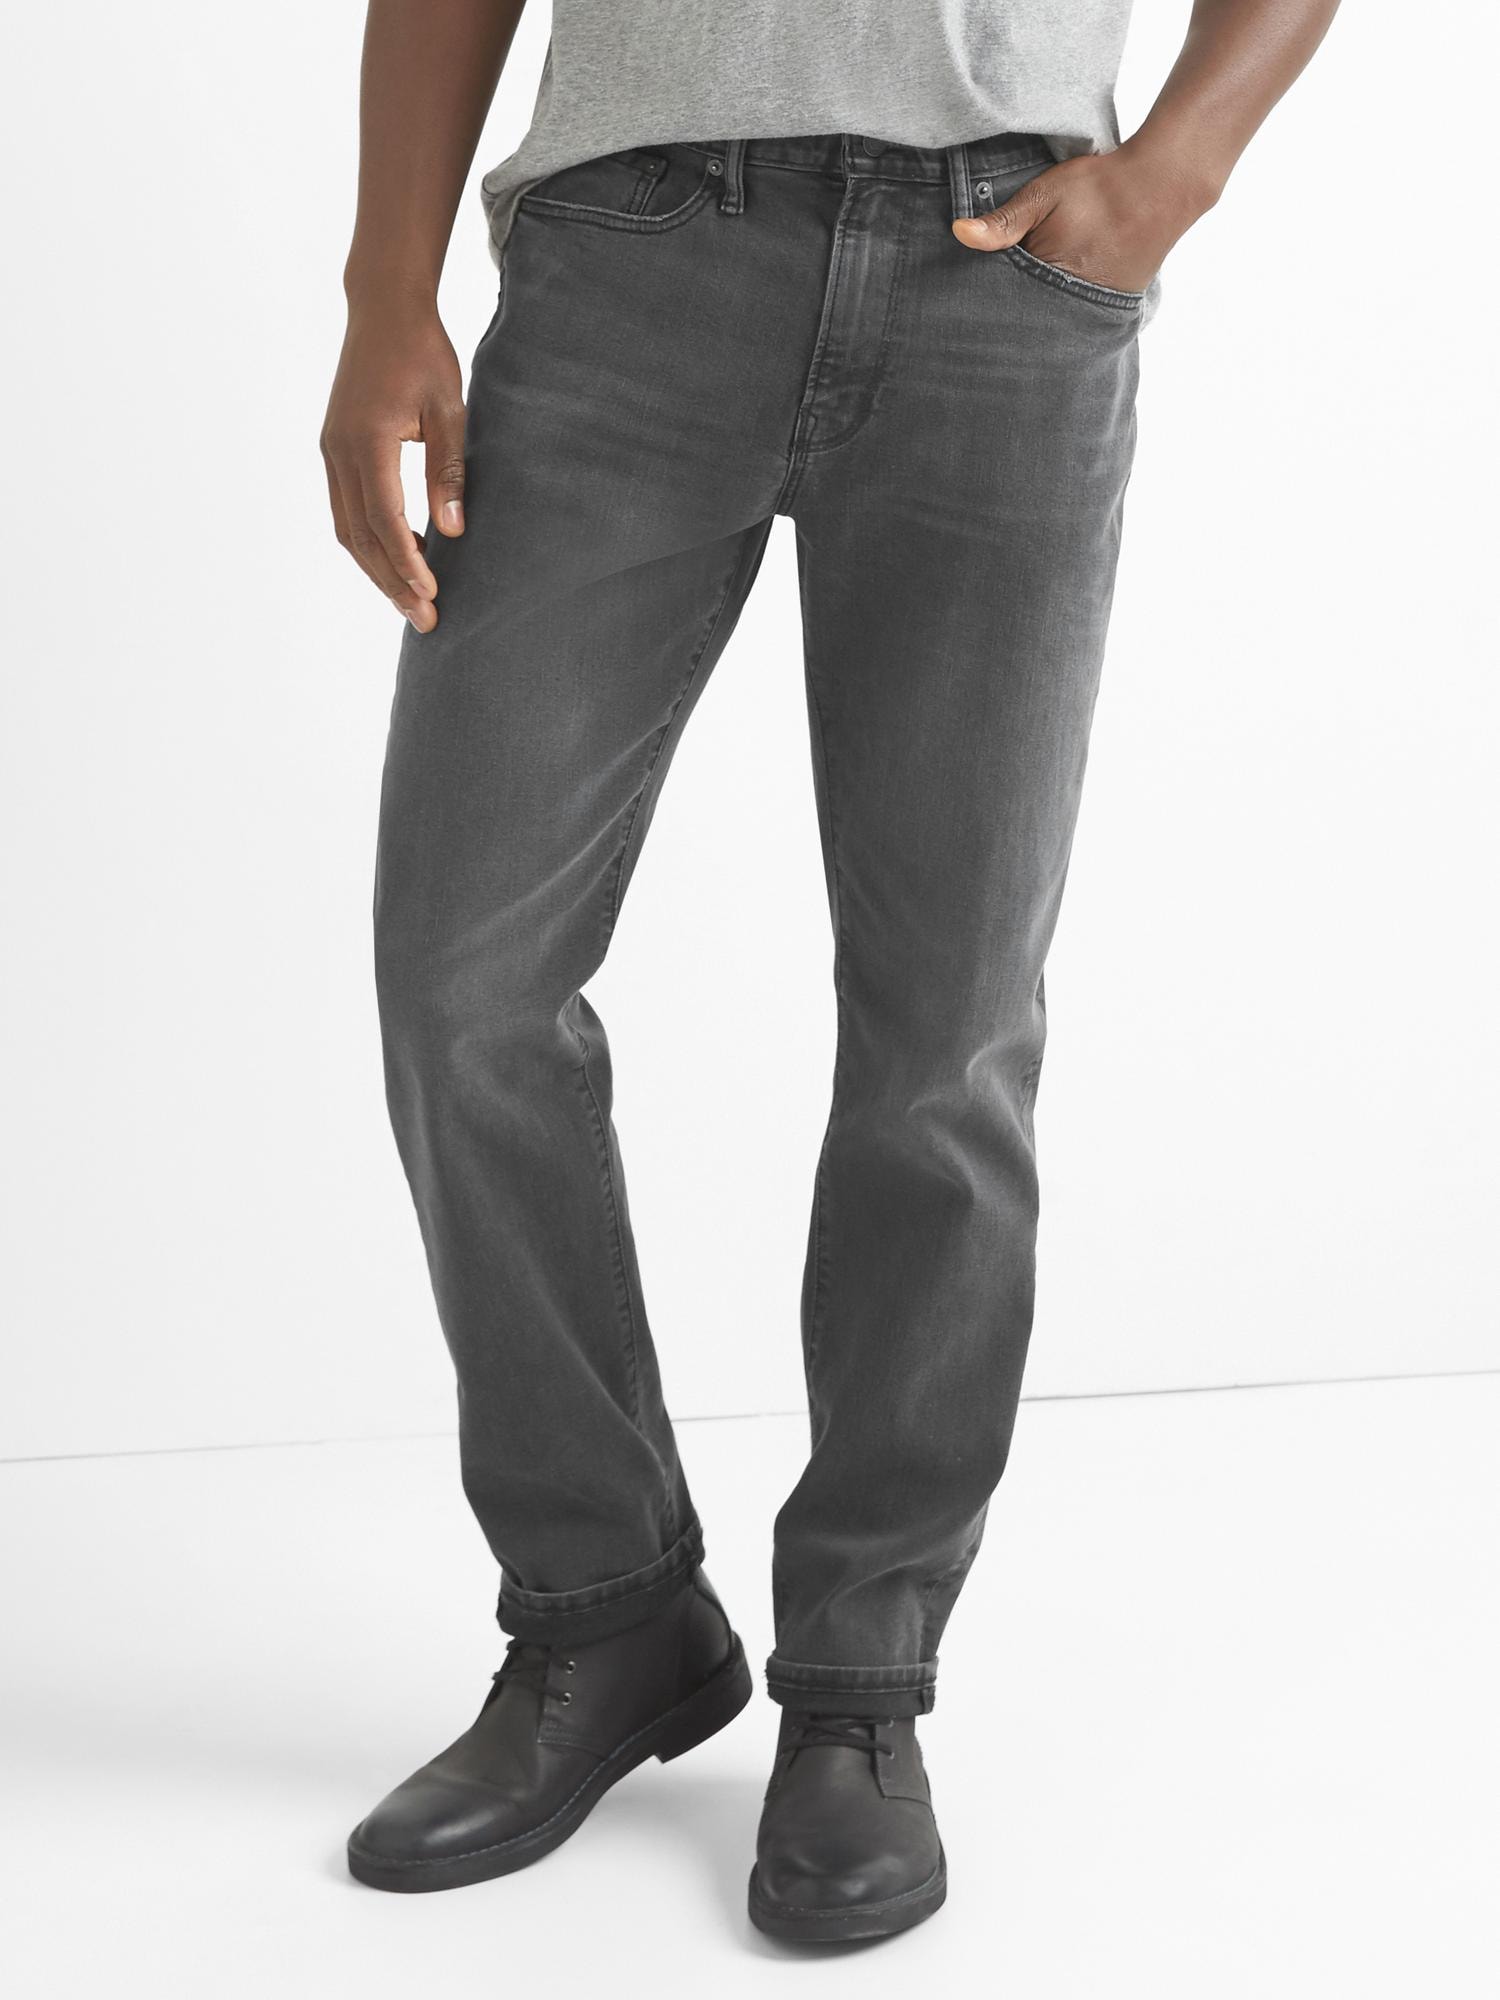 Athletic Taper Jeans With Gapflex | Gap